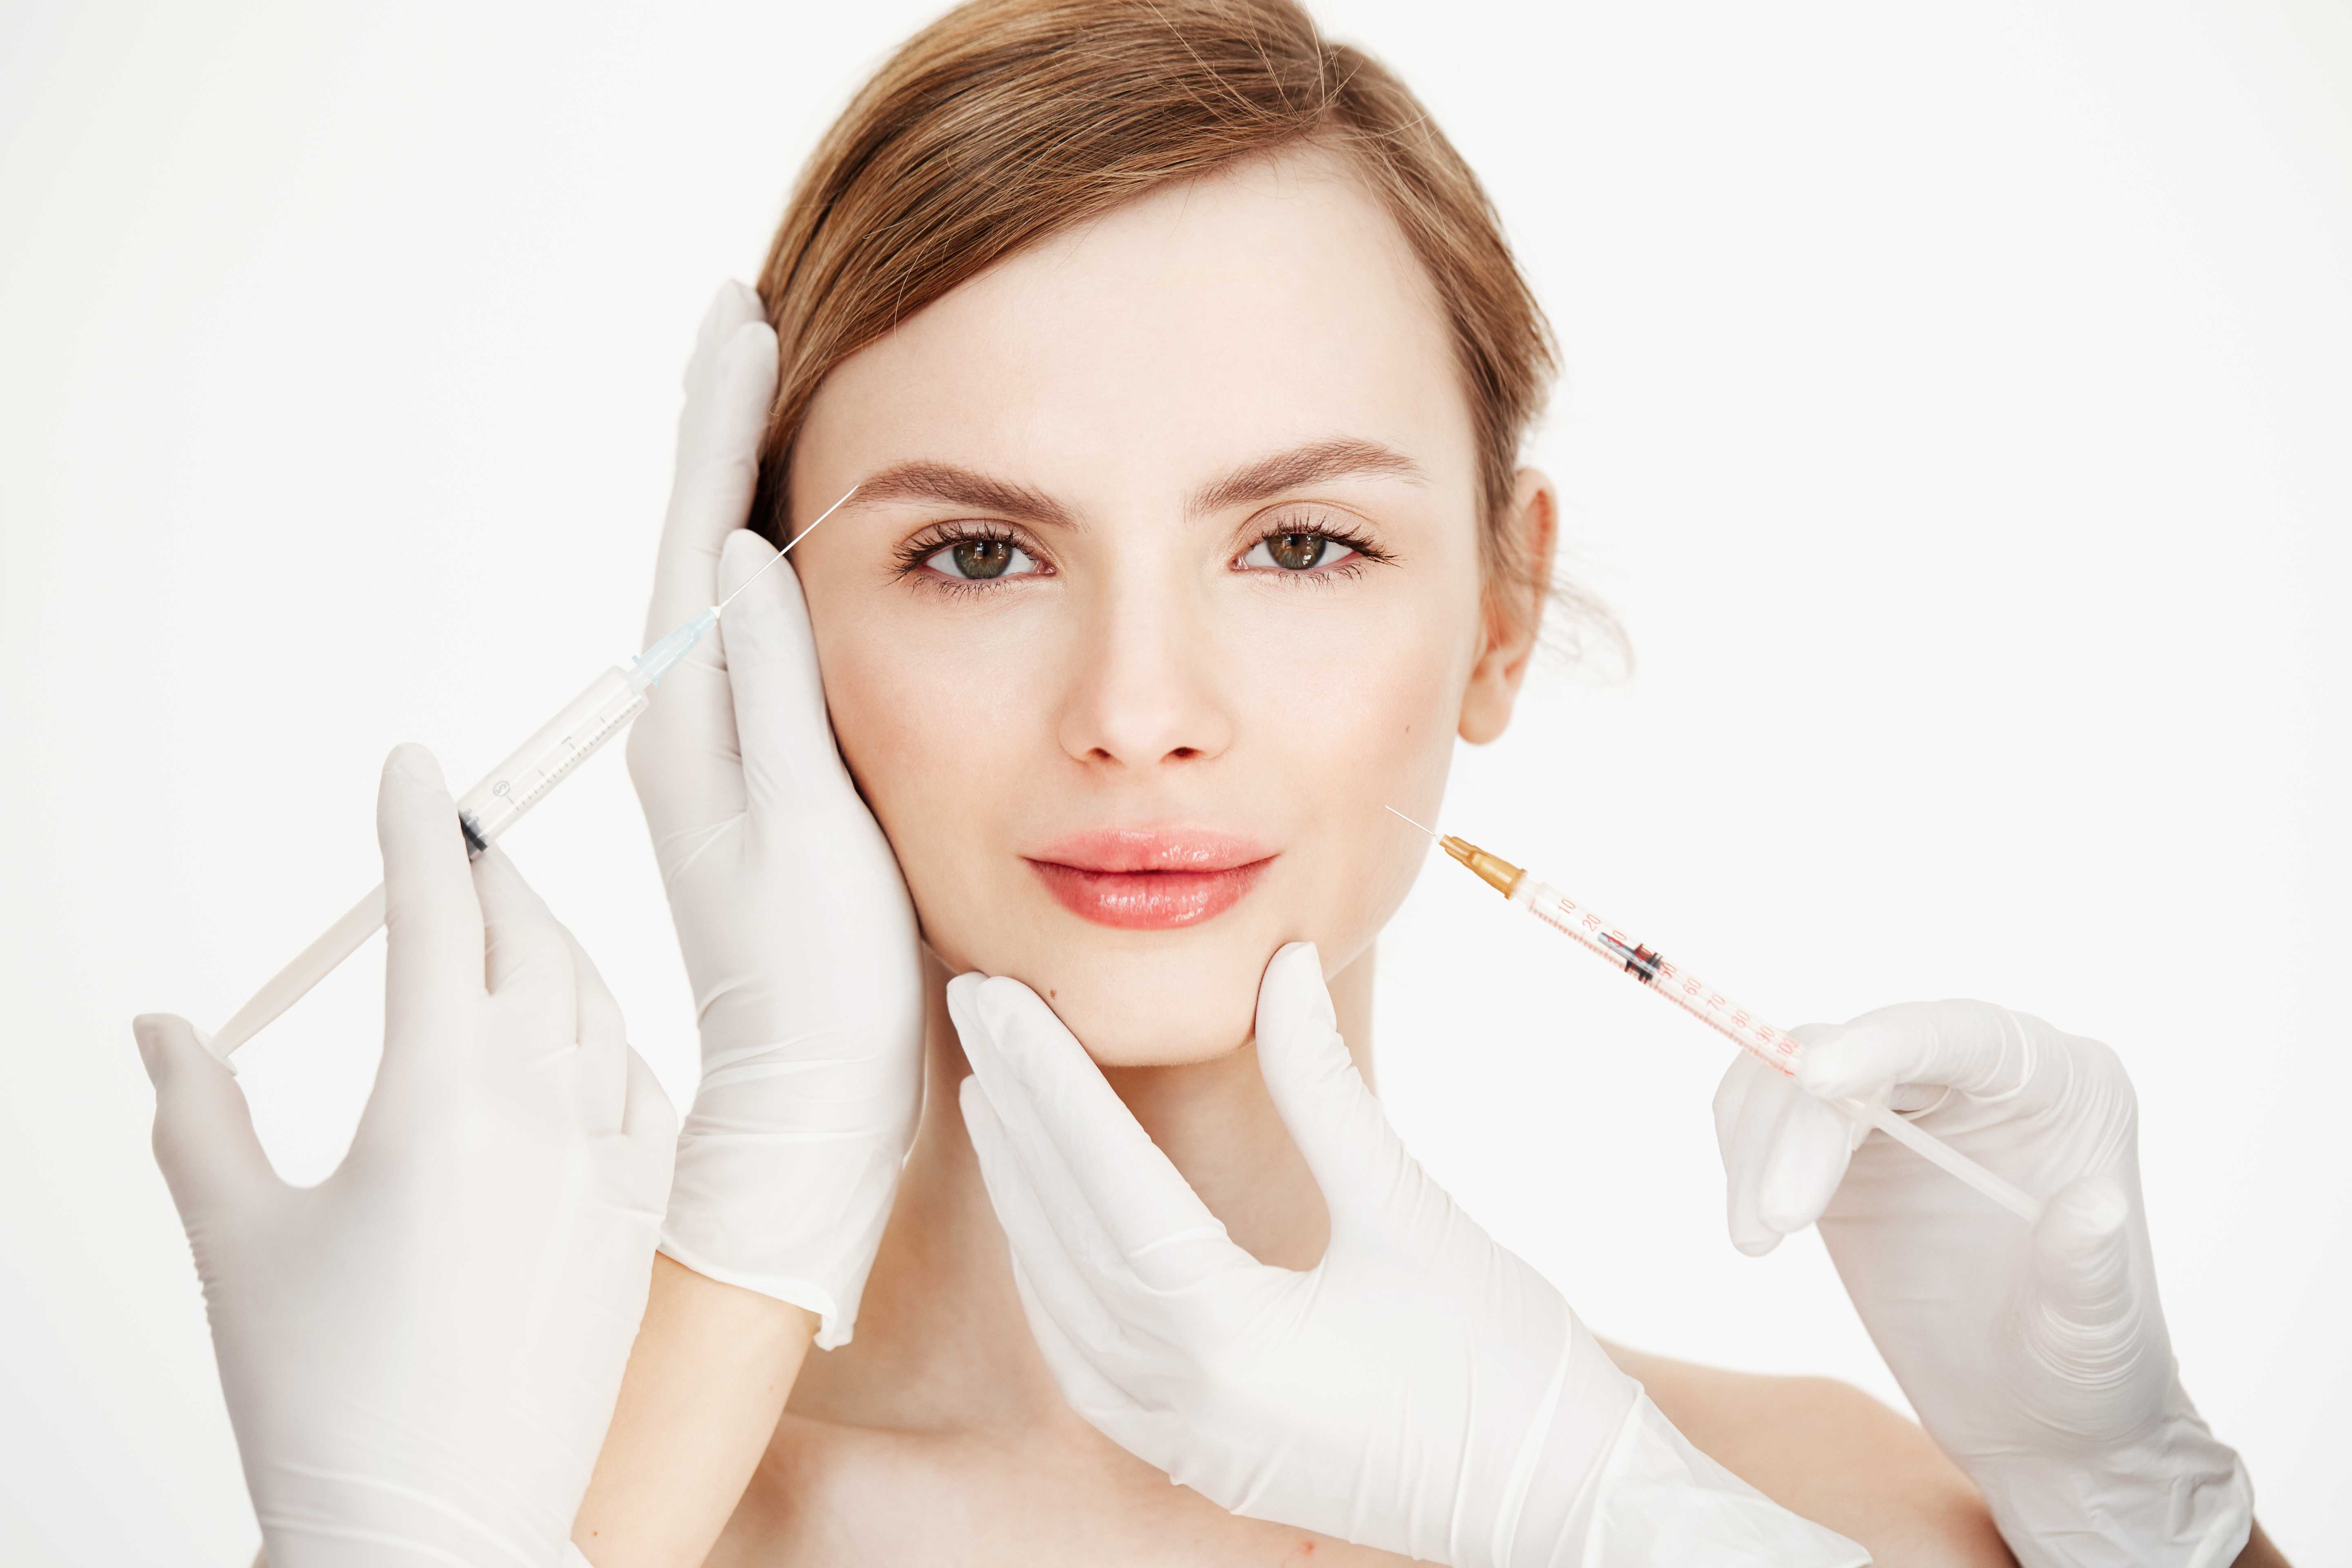 How Is Botox Different from Fillers?